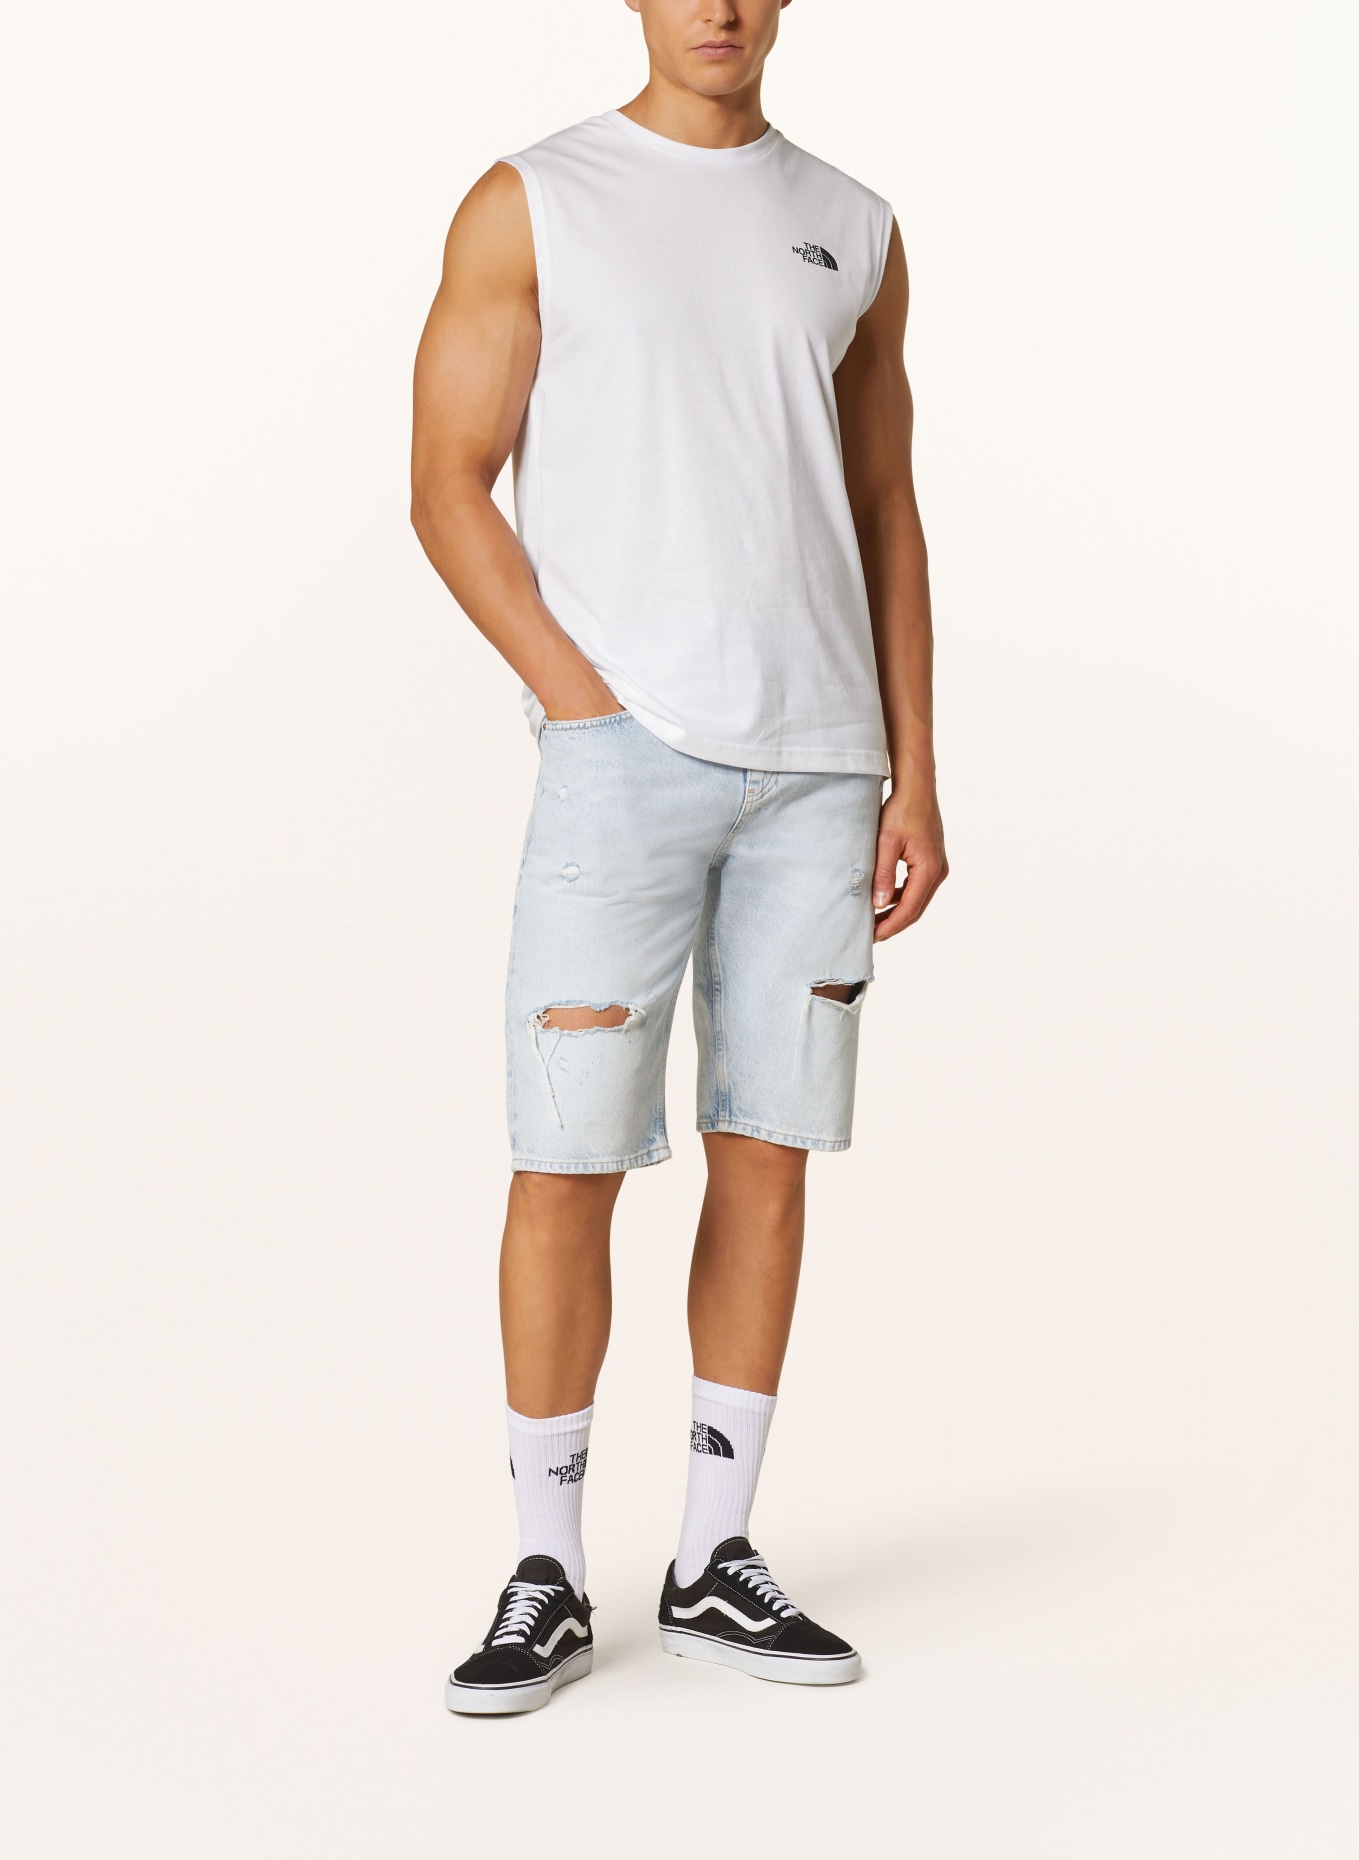 THE NORTH FACE Oversized-Tanktop SIMPLE DOME, Farbe: WEISS (Bild 2)